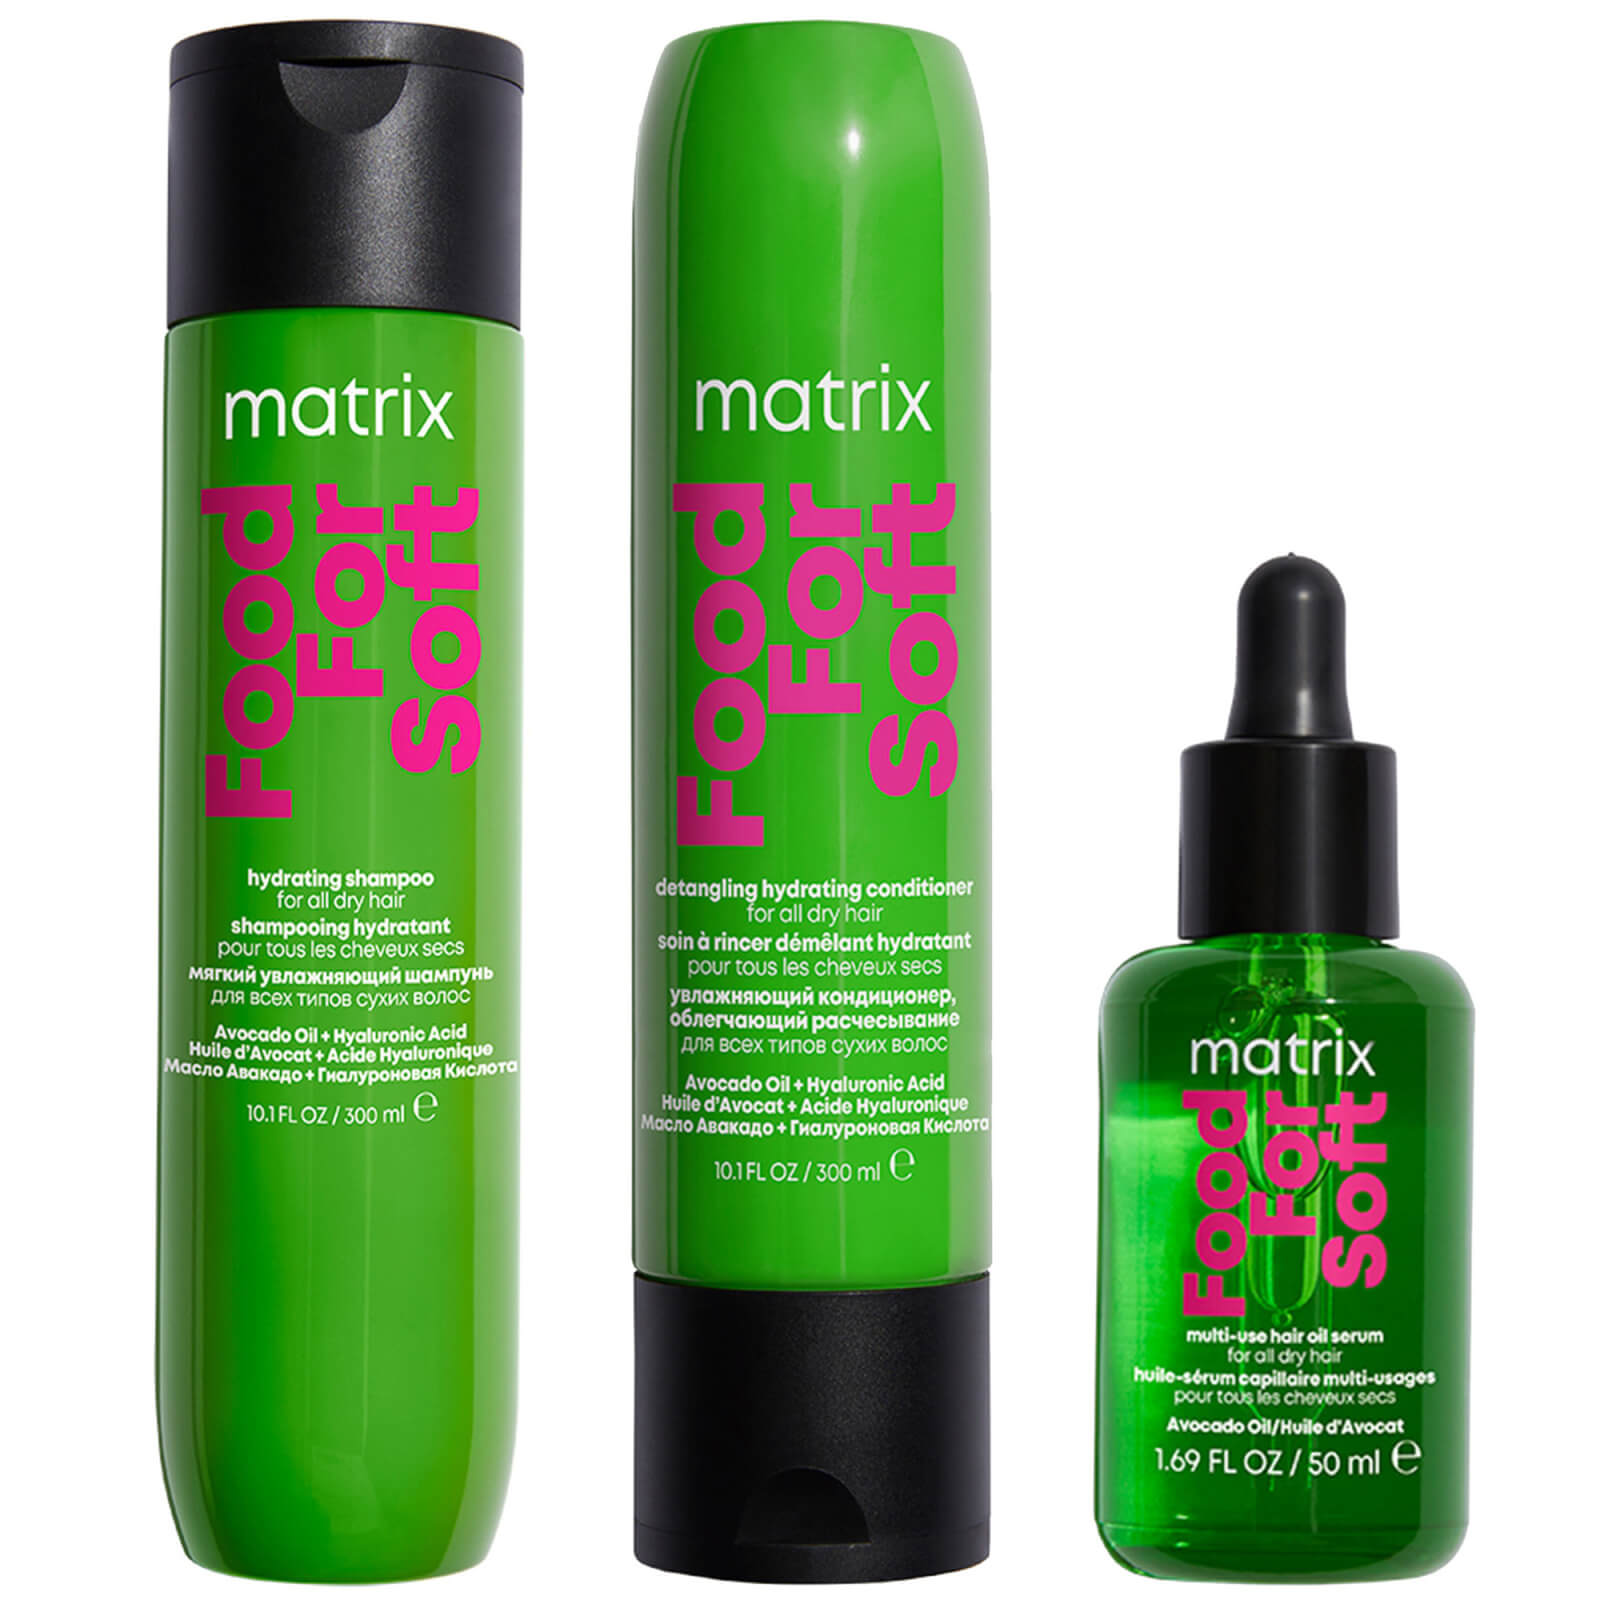 Matrix Food For Soft Hydrating Shampoo, Conditioner And Hair Oil With Avocado Oil And Hyaluronic Acid For D